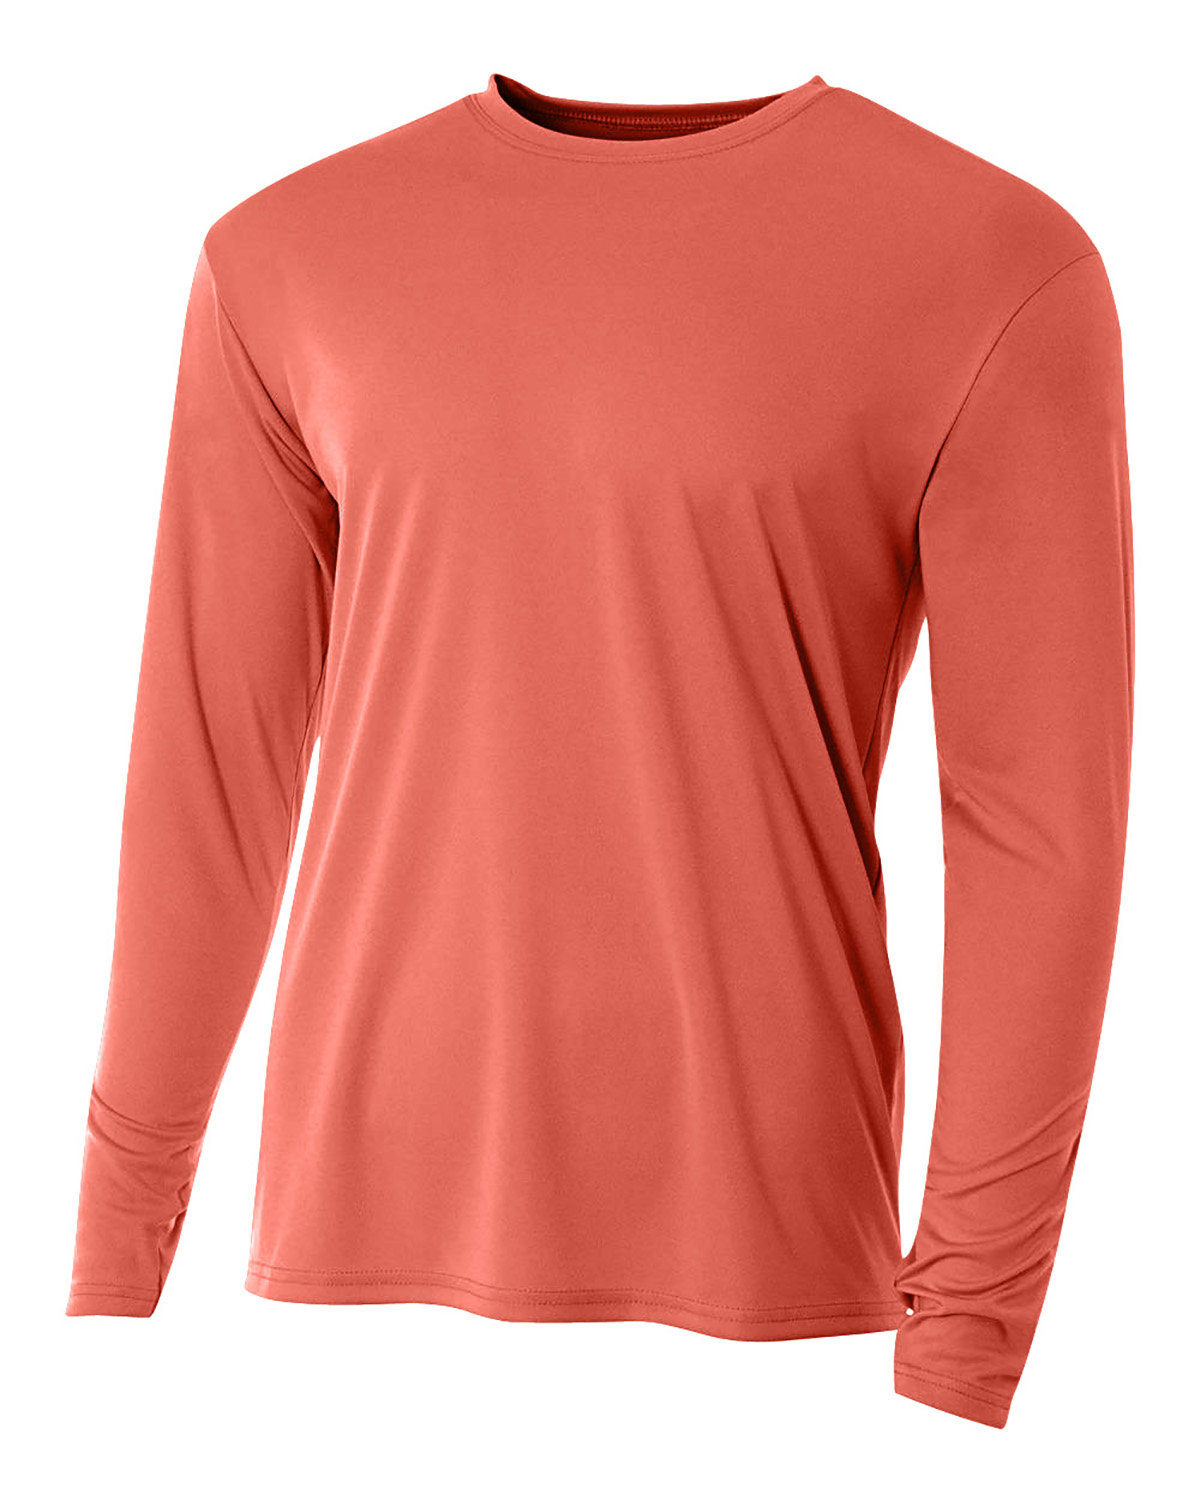 A4 Men's Cooling Performance Long Sleeve T-Shirt CORAL 